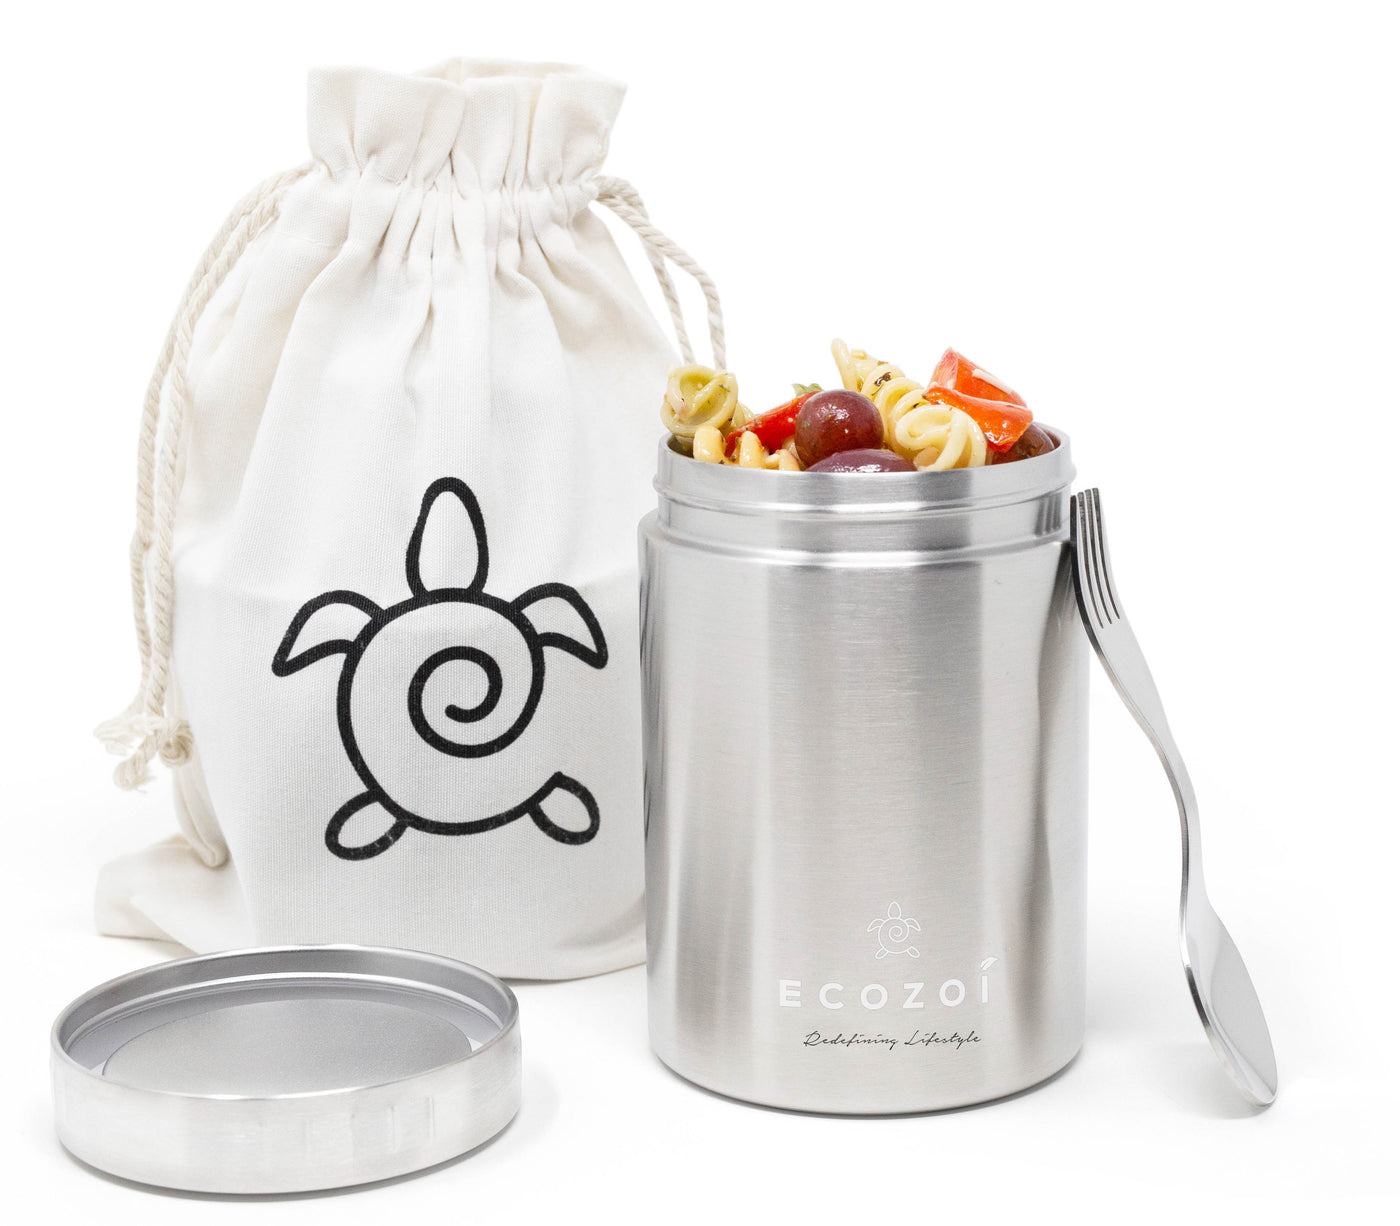 ecozoi Vacuum Insulated Stainless Steel Food Jar - 17 oz with Spork & Lunch Bag